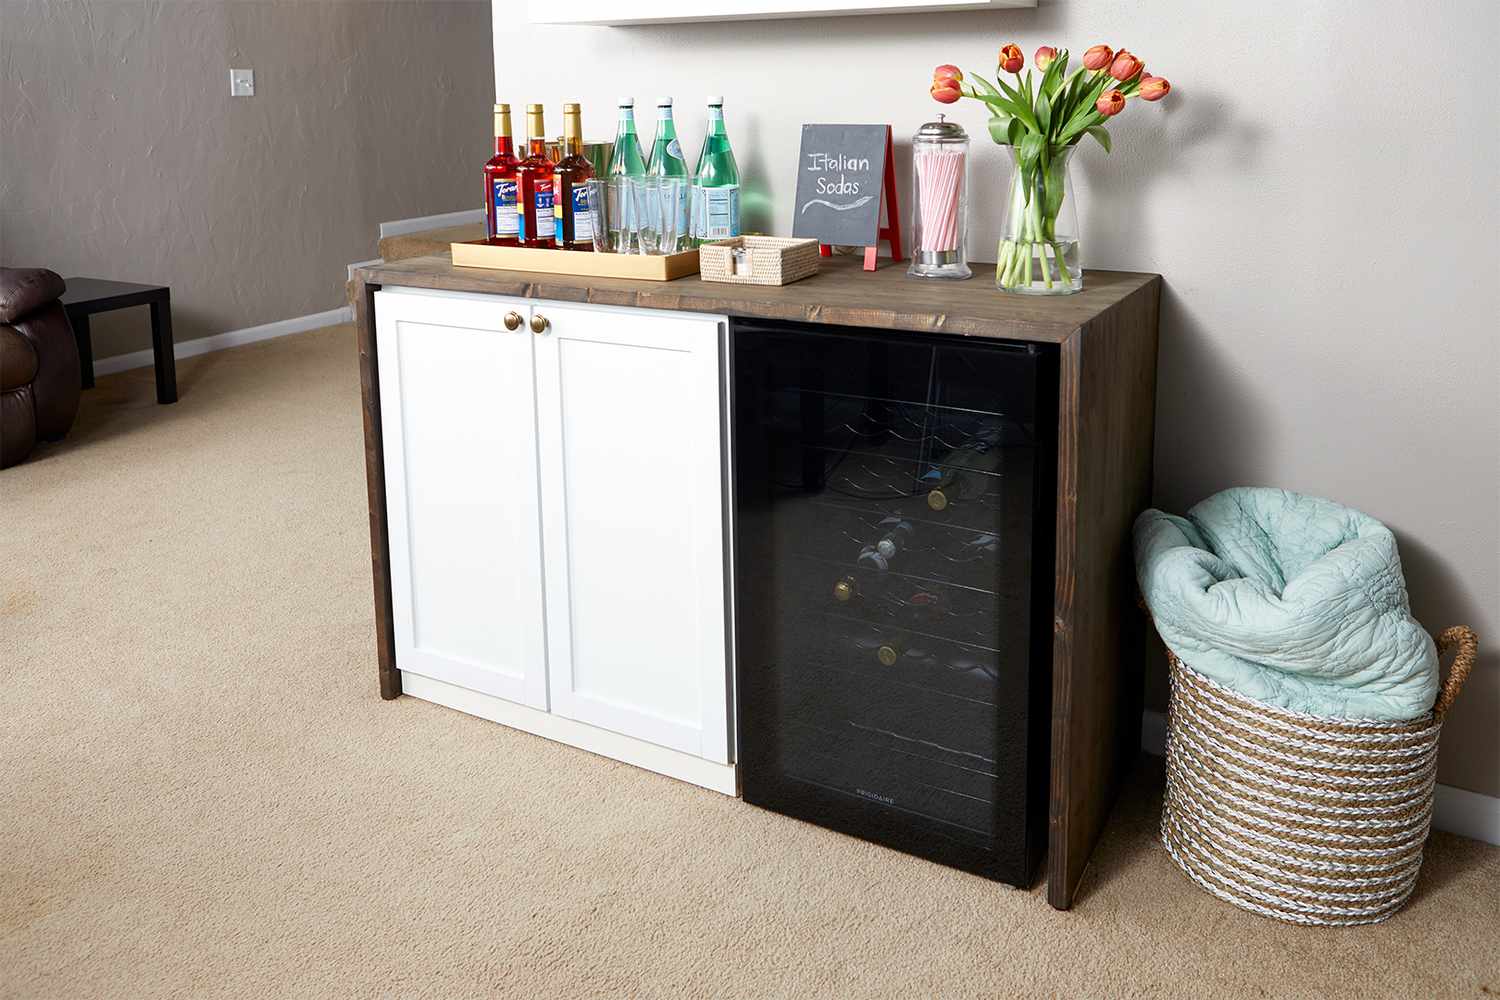 How To Build A Dry Bar Better Homes, Mini Refrigerator That Looks Like A Cabinet